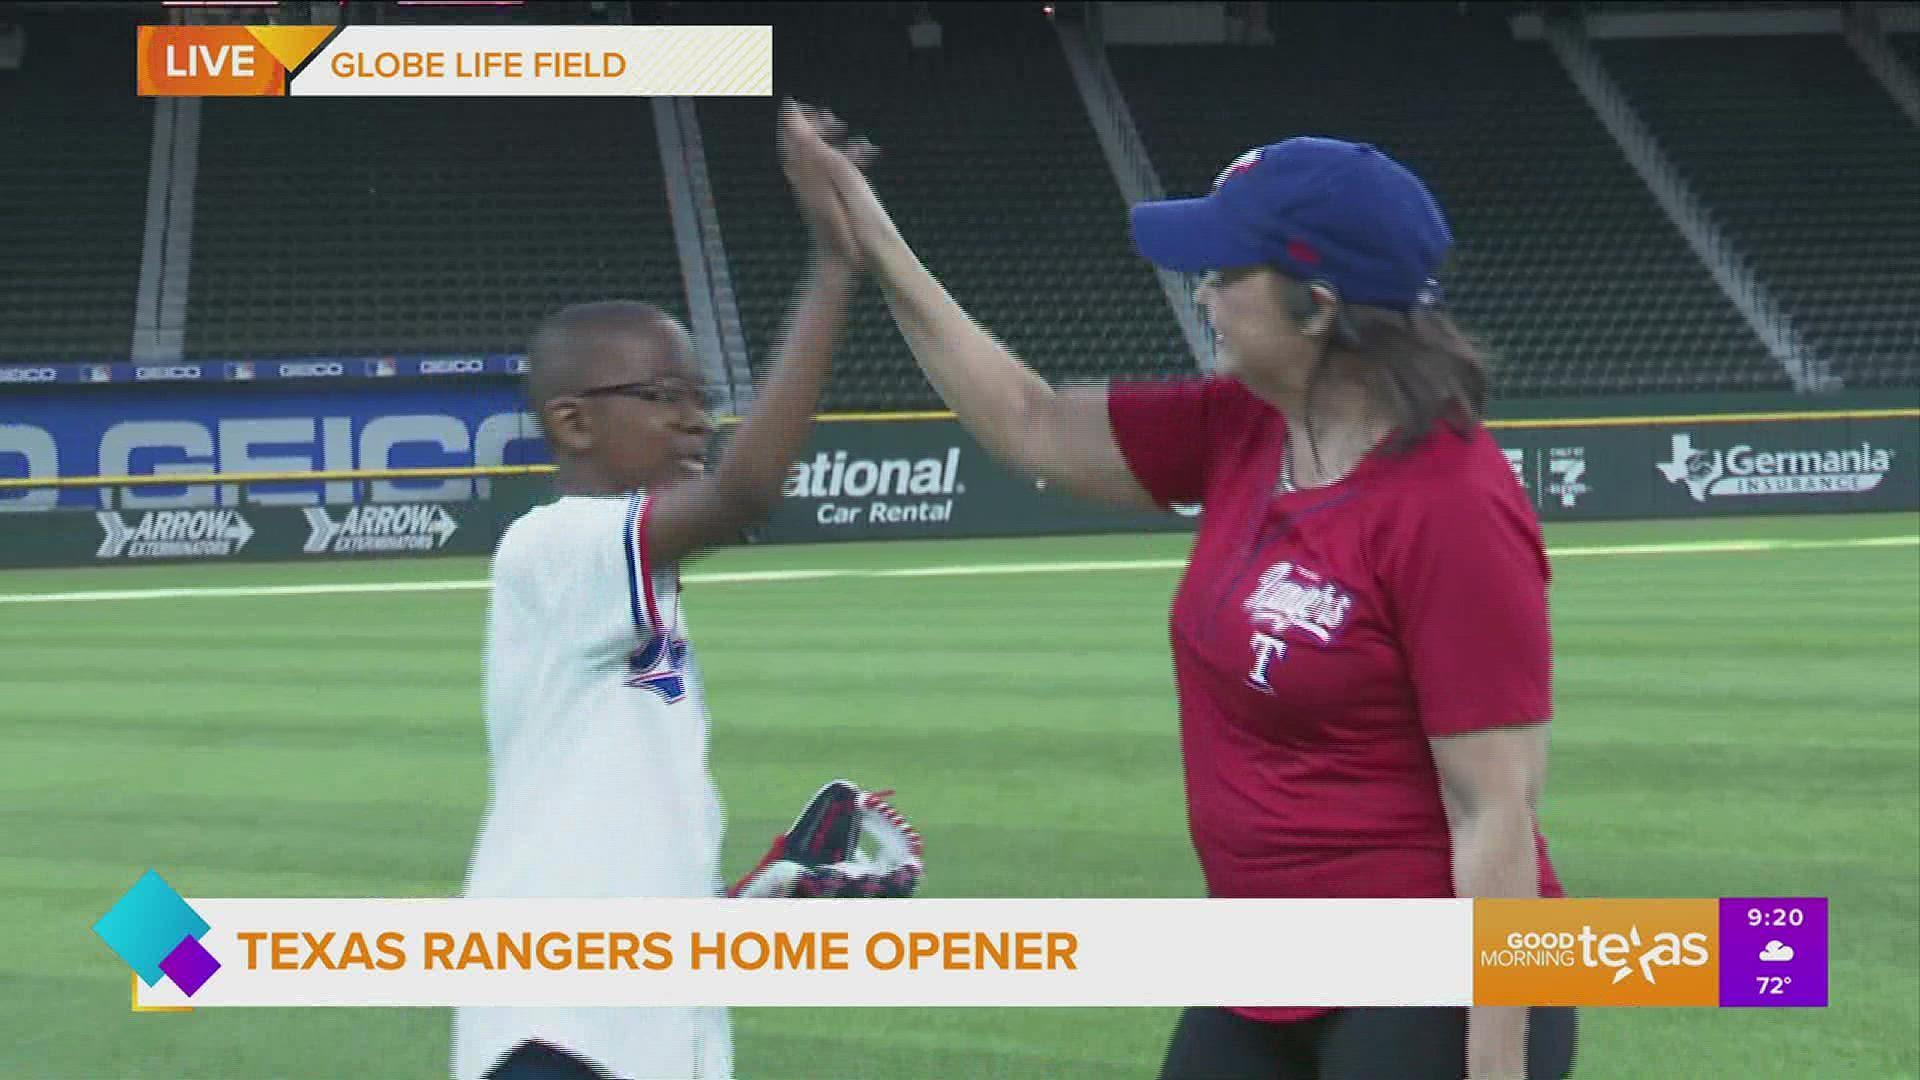 TIME Magazine’s 2021 ‘Kid of the Year’ and Mansfield’s own, Orion Jean, gets the honor of throwing out the first pitch at the Texas Rangers home opener.